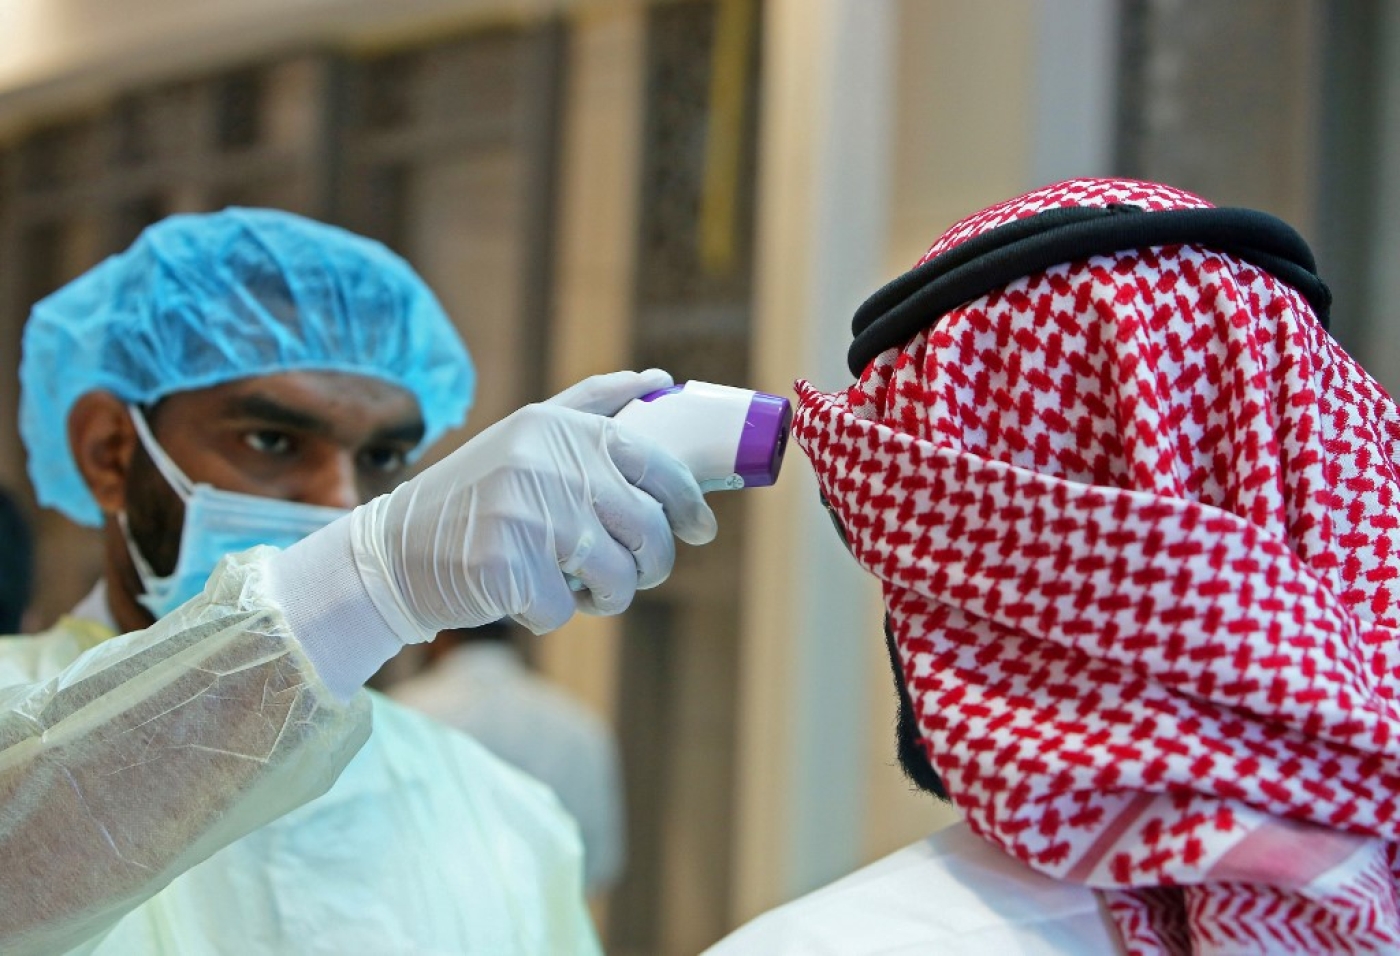 Coronavirus: Kuwait reports first death from Covid-19 as cases ...